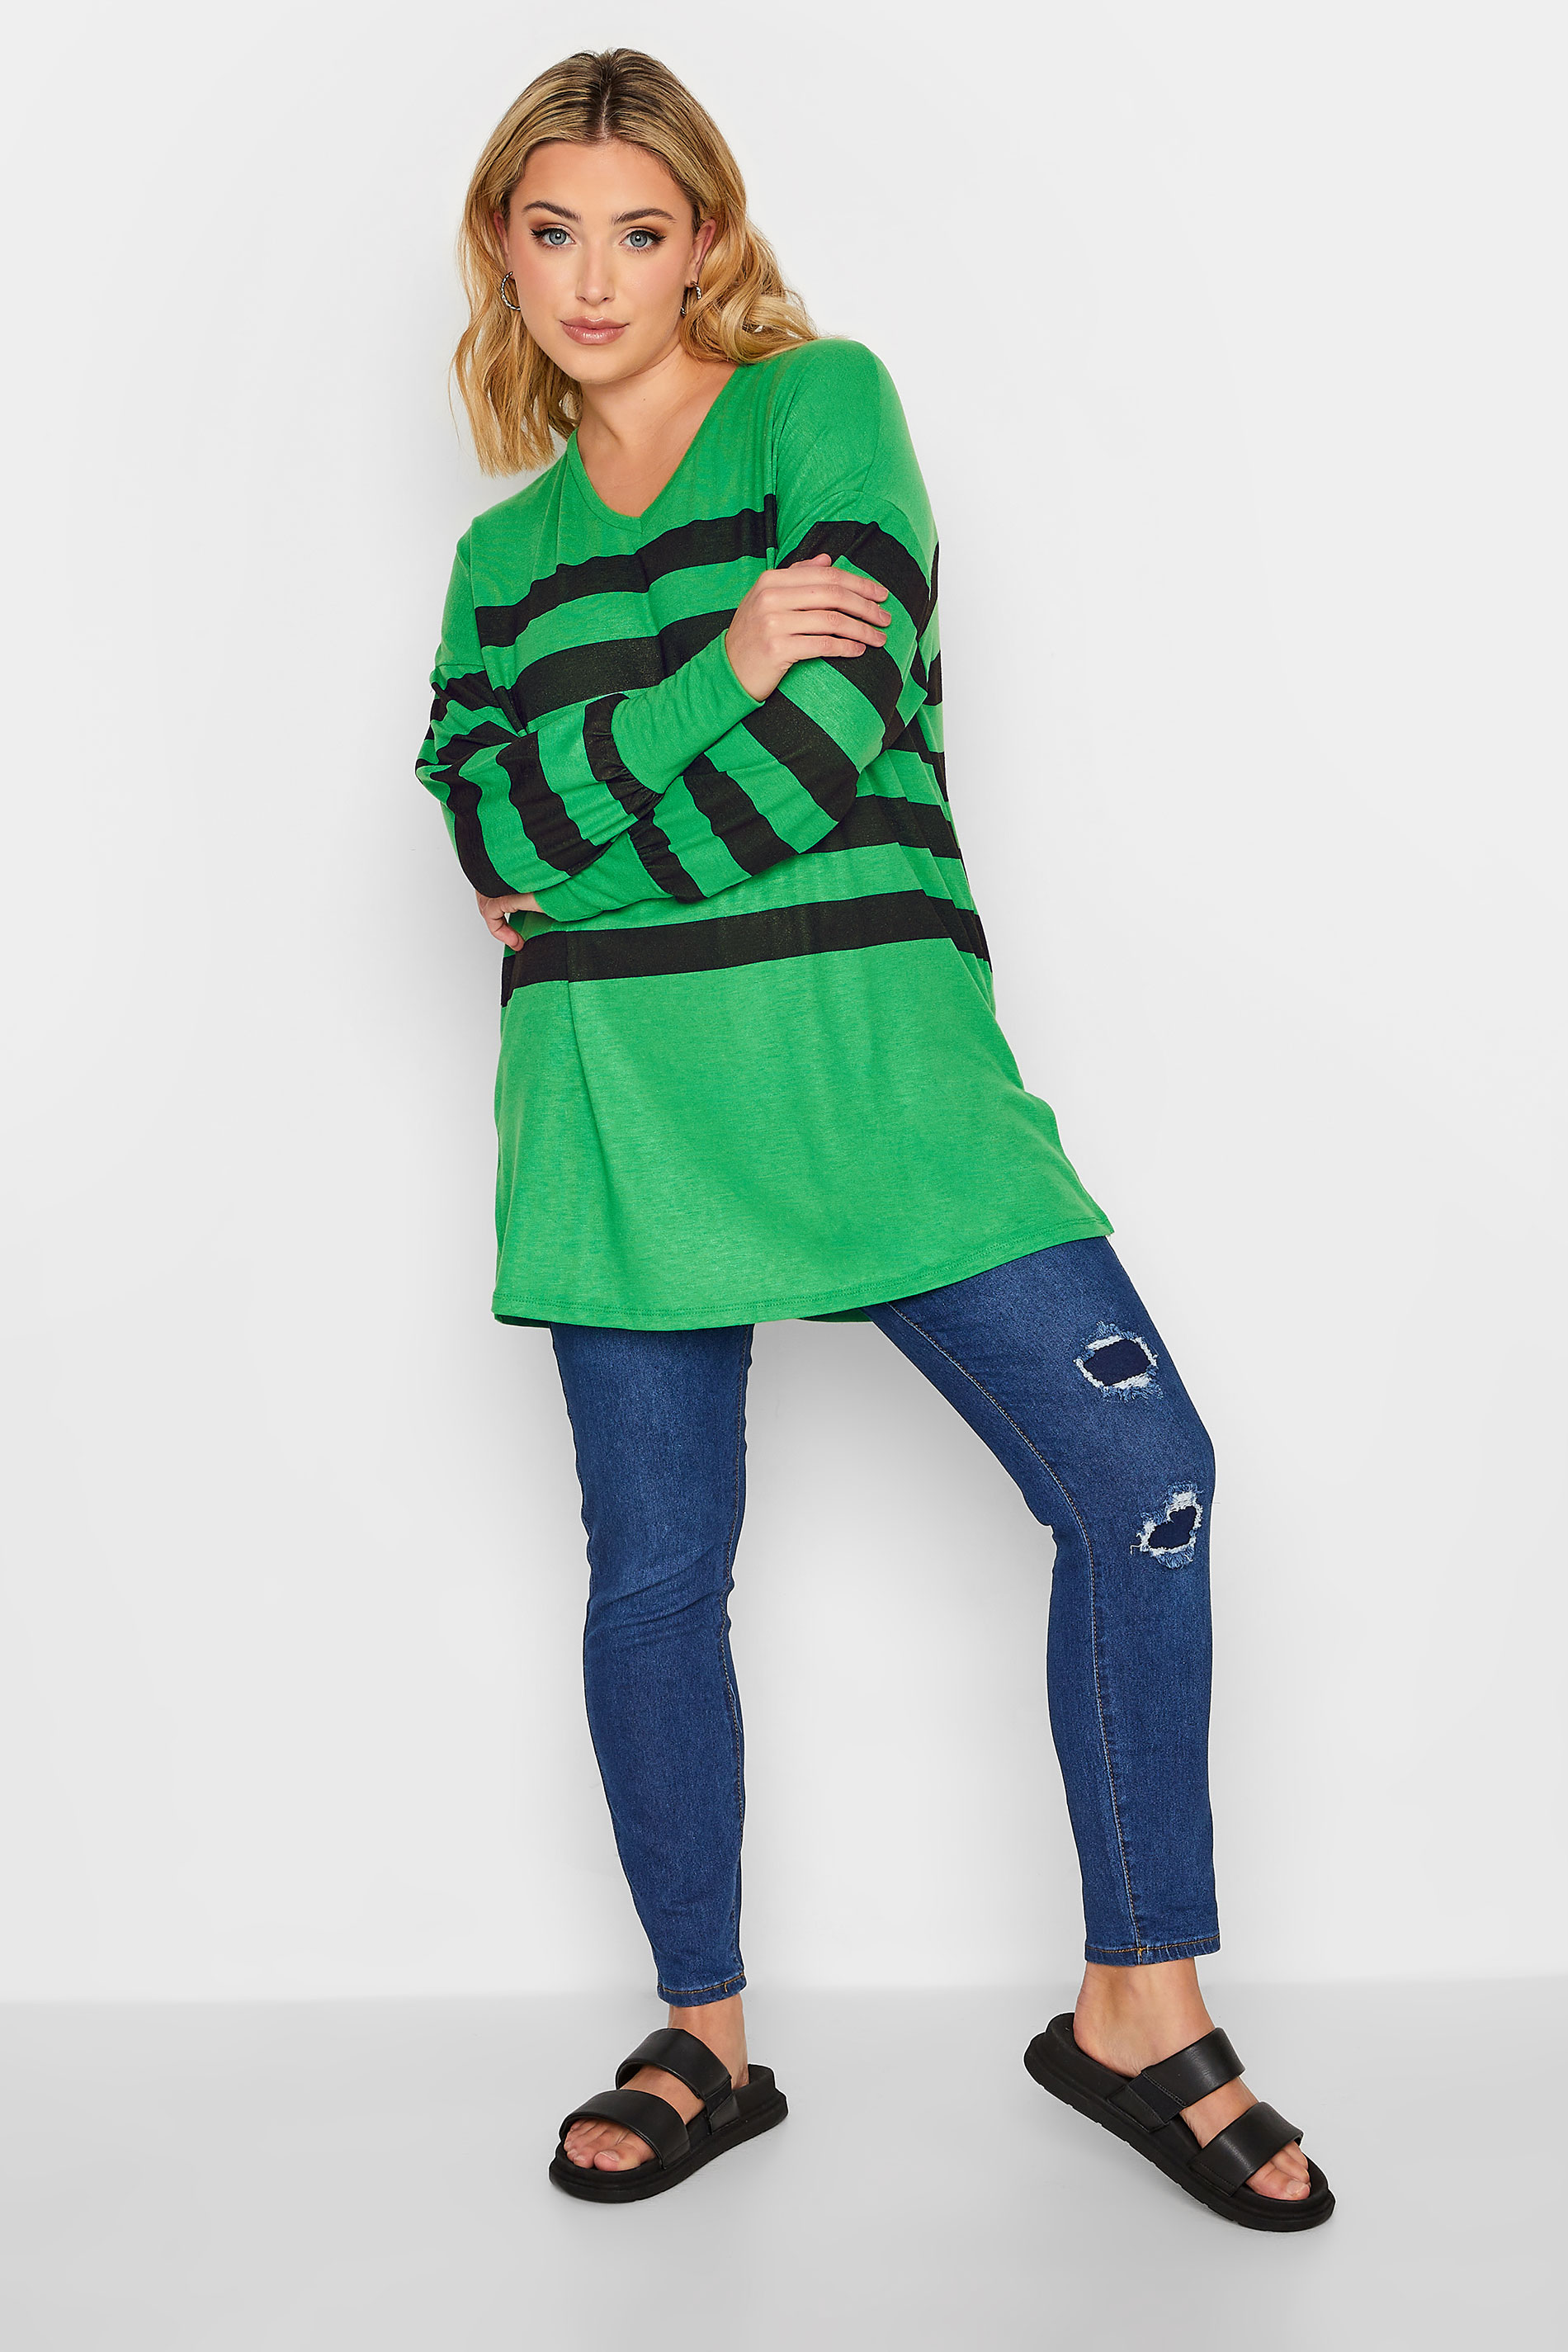 YOURS LUXURY Curve Green Stripe V-Neck Top | Yours Clothing 2